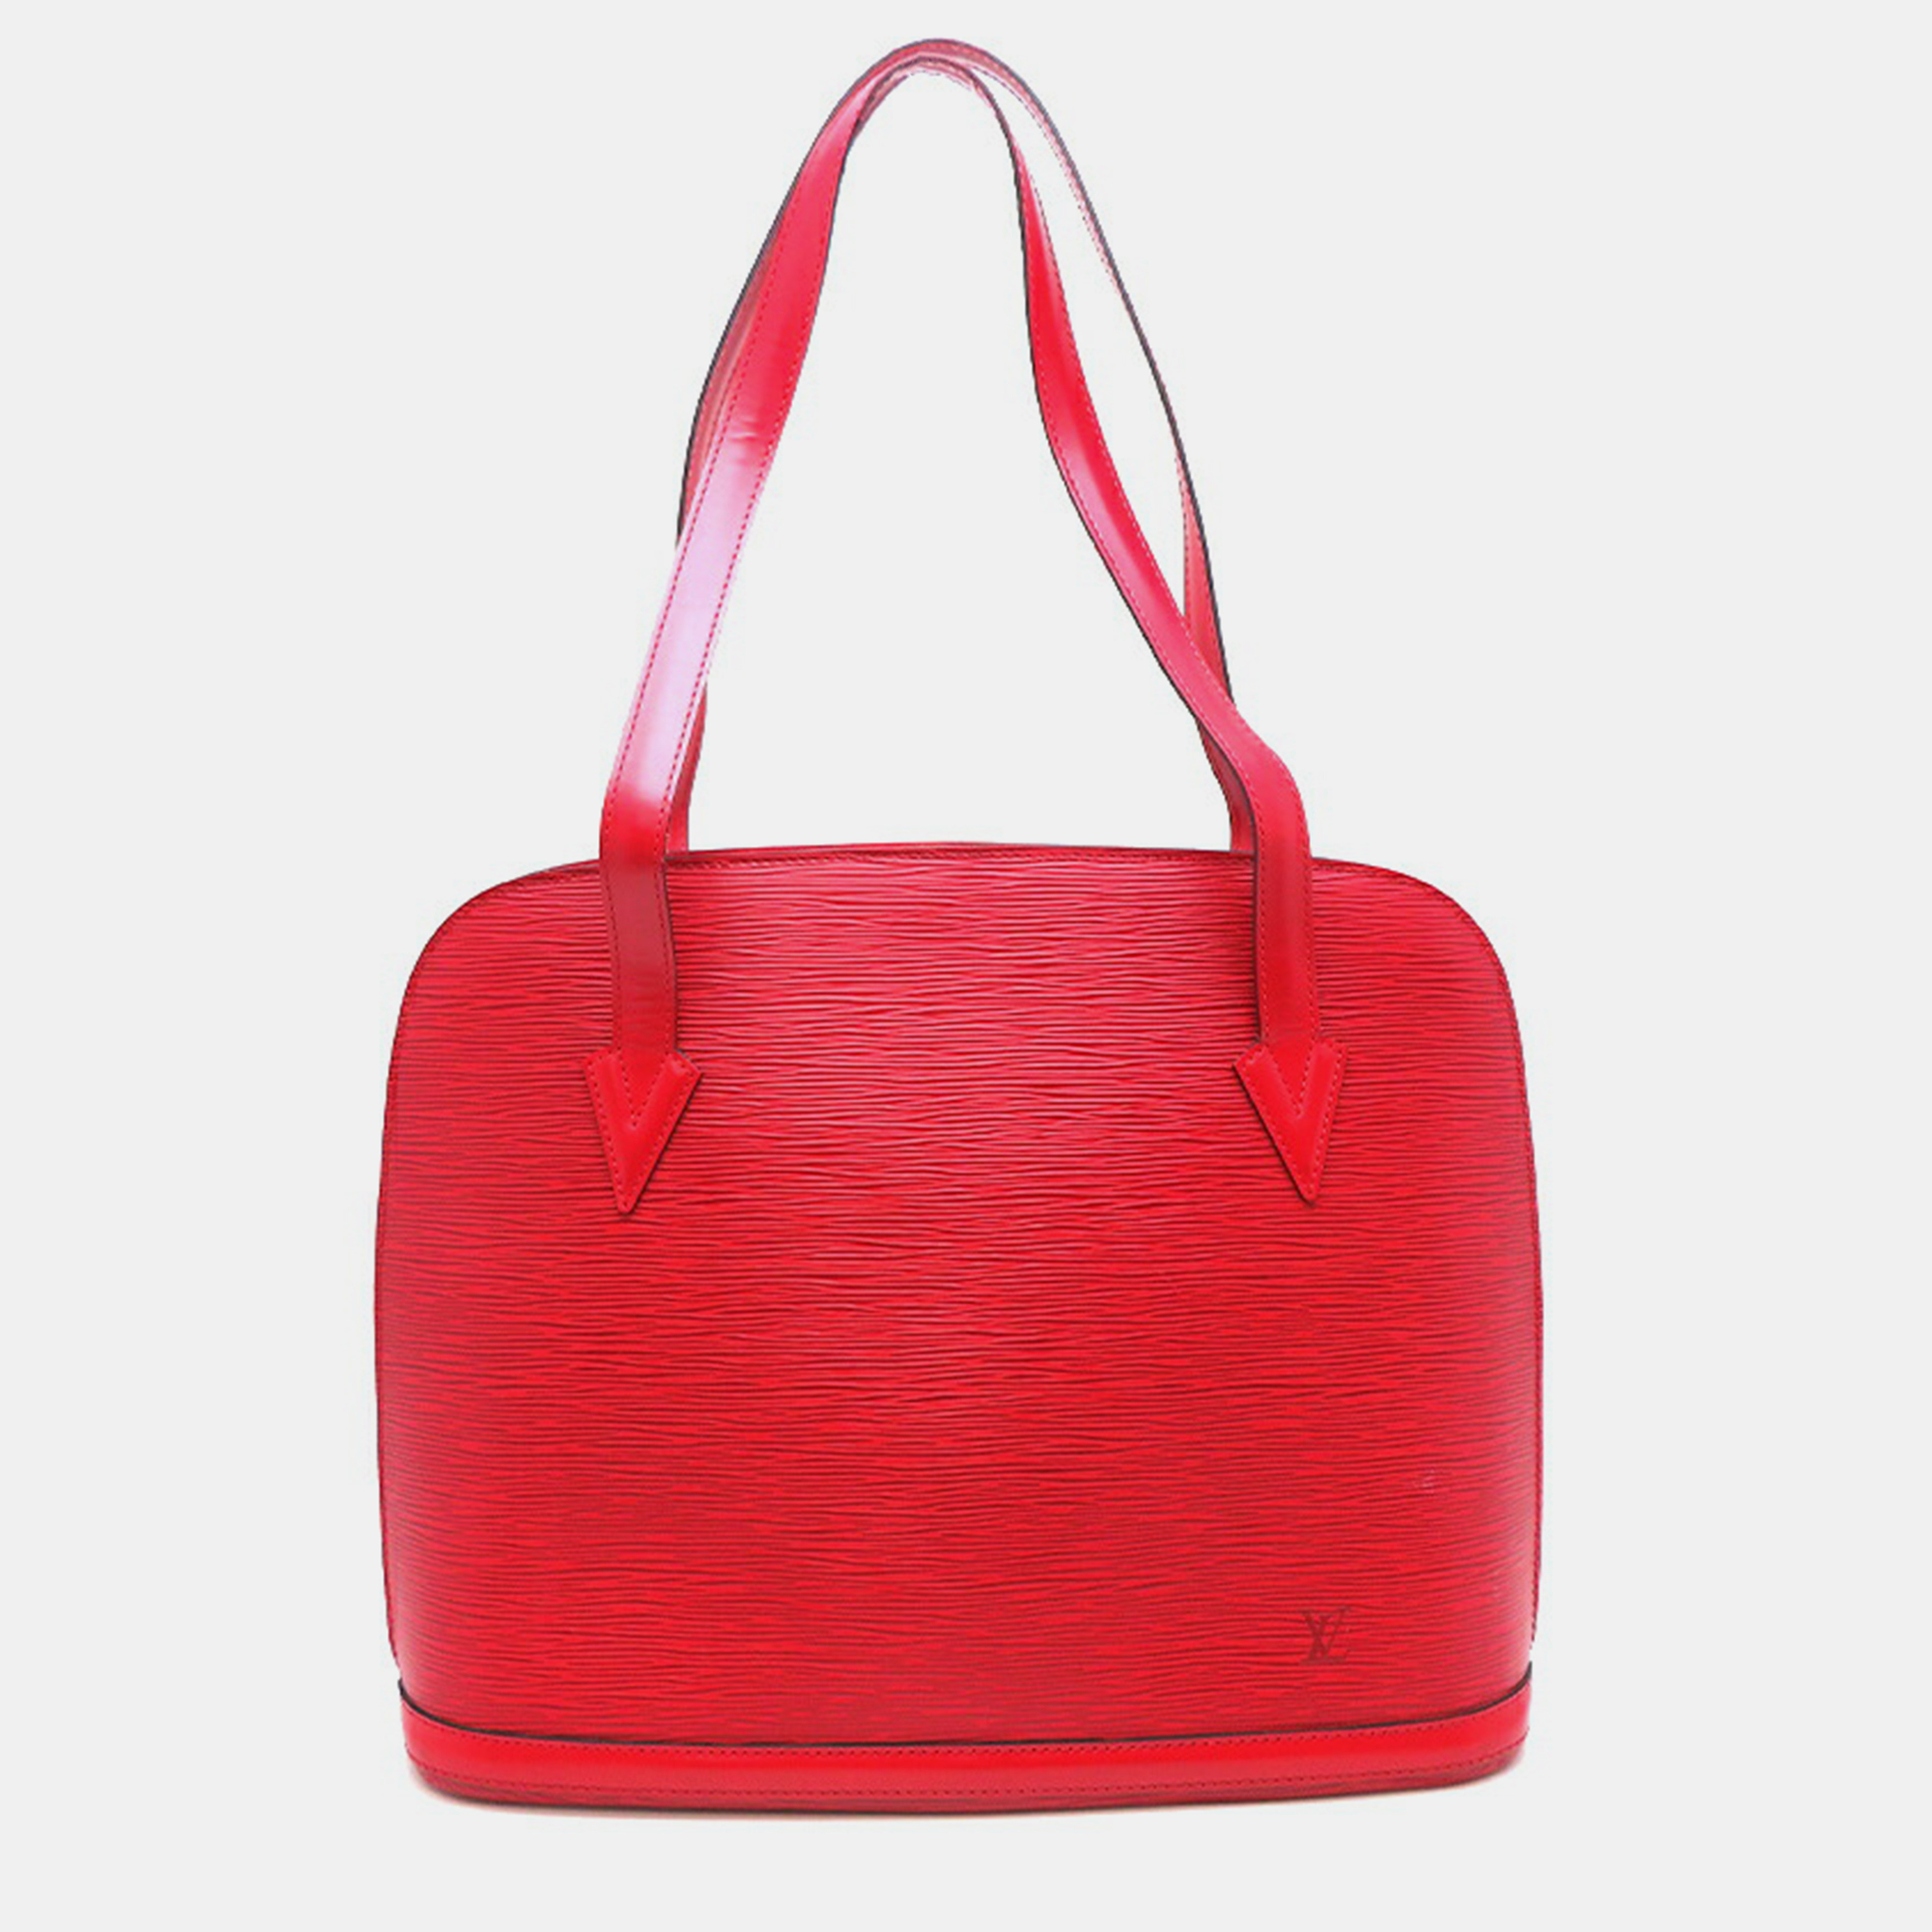 Louis Vuitton Red Epi Leather Lussac Tote Bag